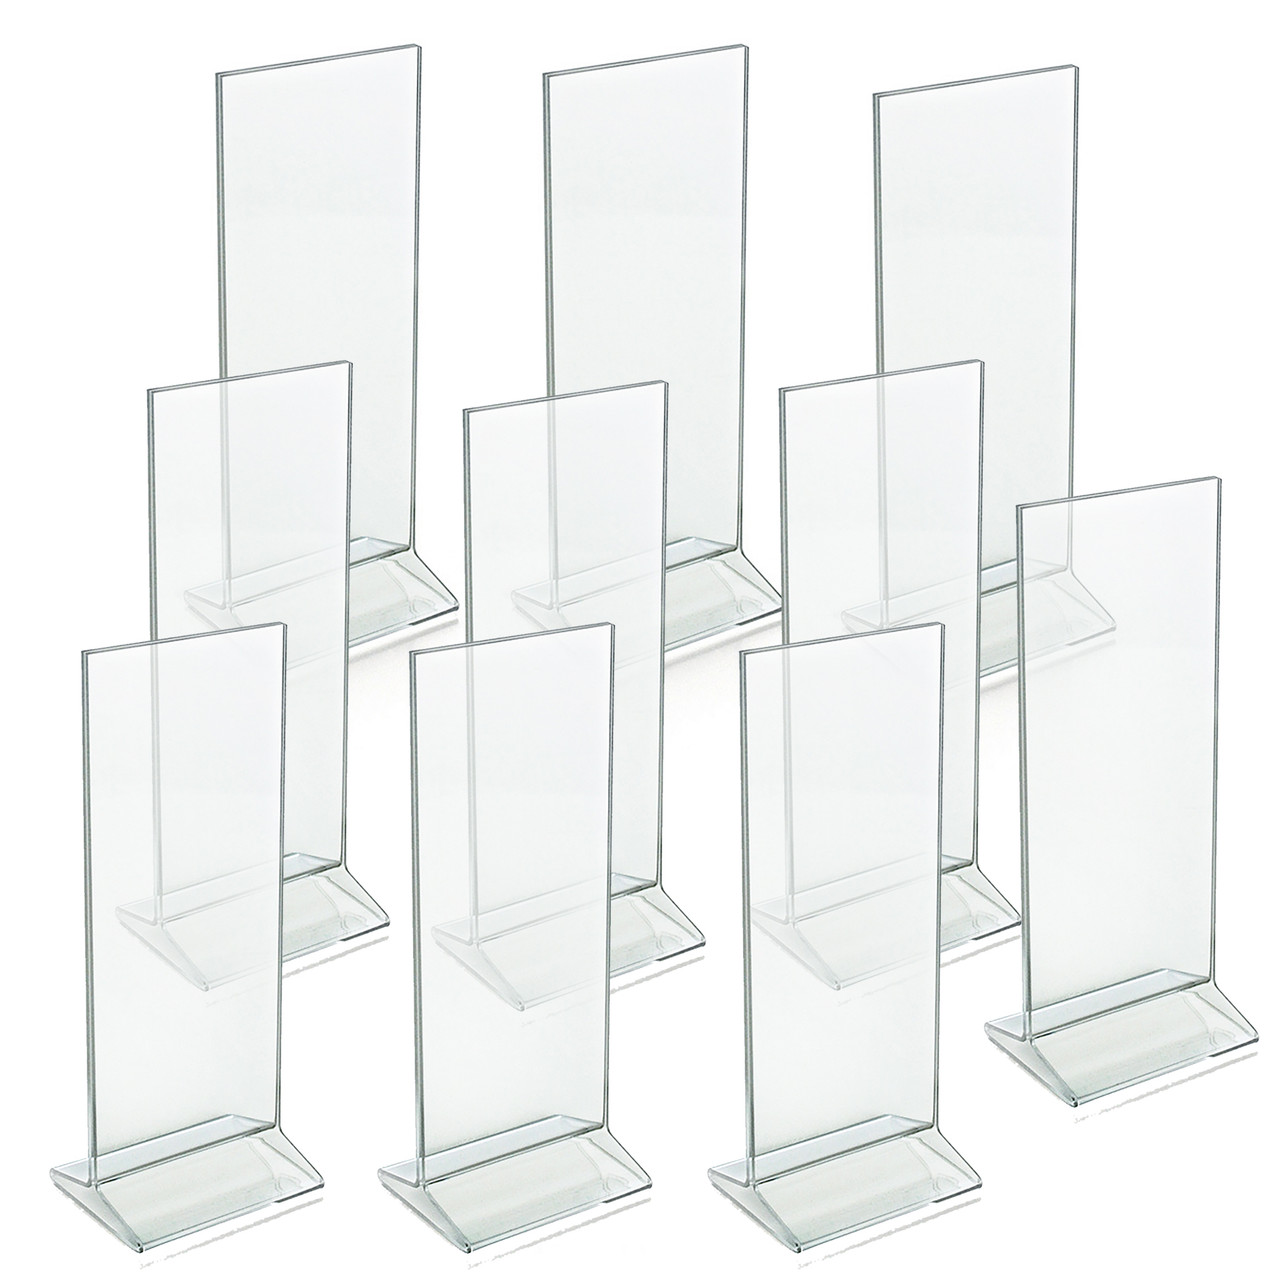 A4 Wall Mount Clear Acrylic Sign Holder With Adhesive 8.5 X 11